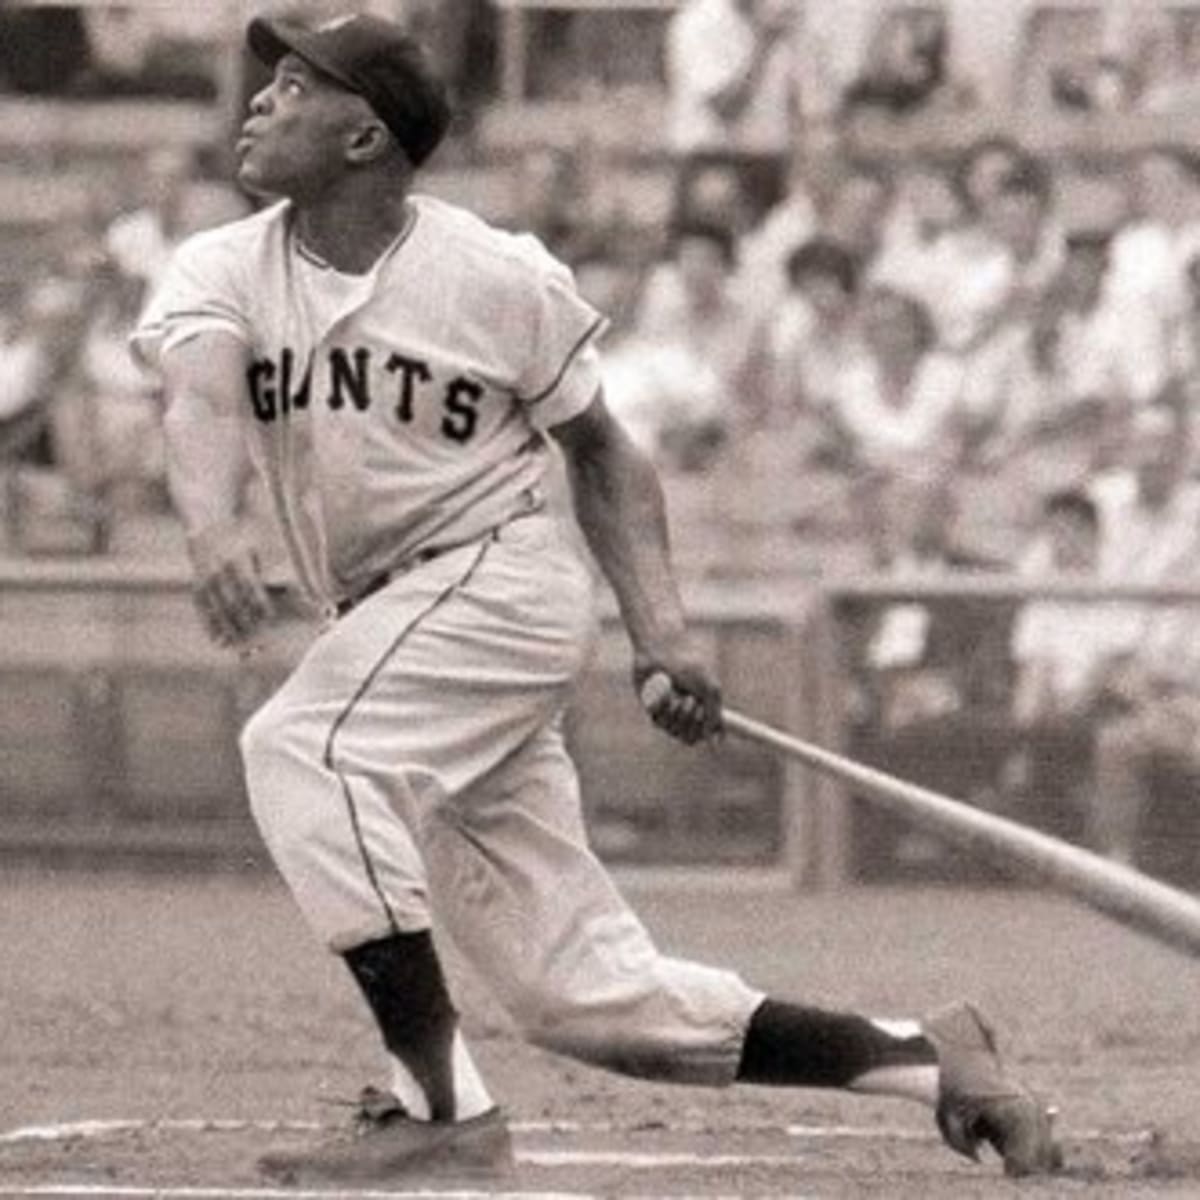 Mickey Mantle and Willie Mays: The best rivalry of baseball's golden age